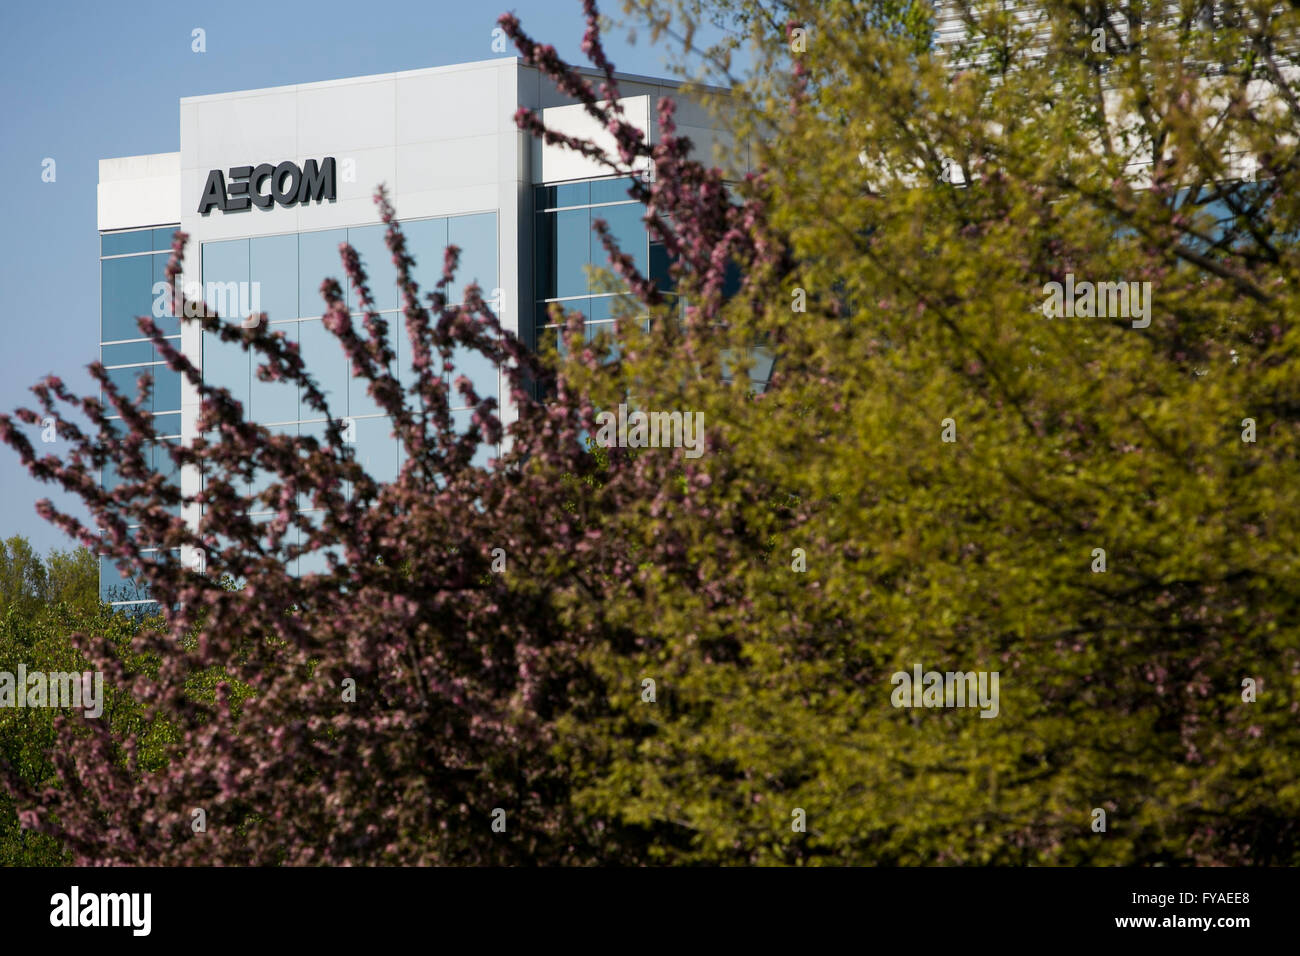 A logo sign outside of a facility occupied by AECOM in Chantilly, Virginia on April 16, 2016. Stock Photo